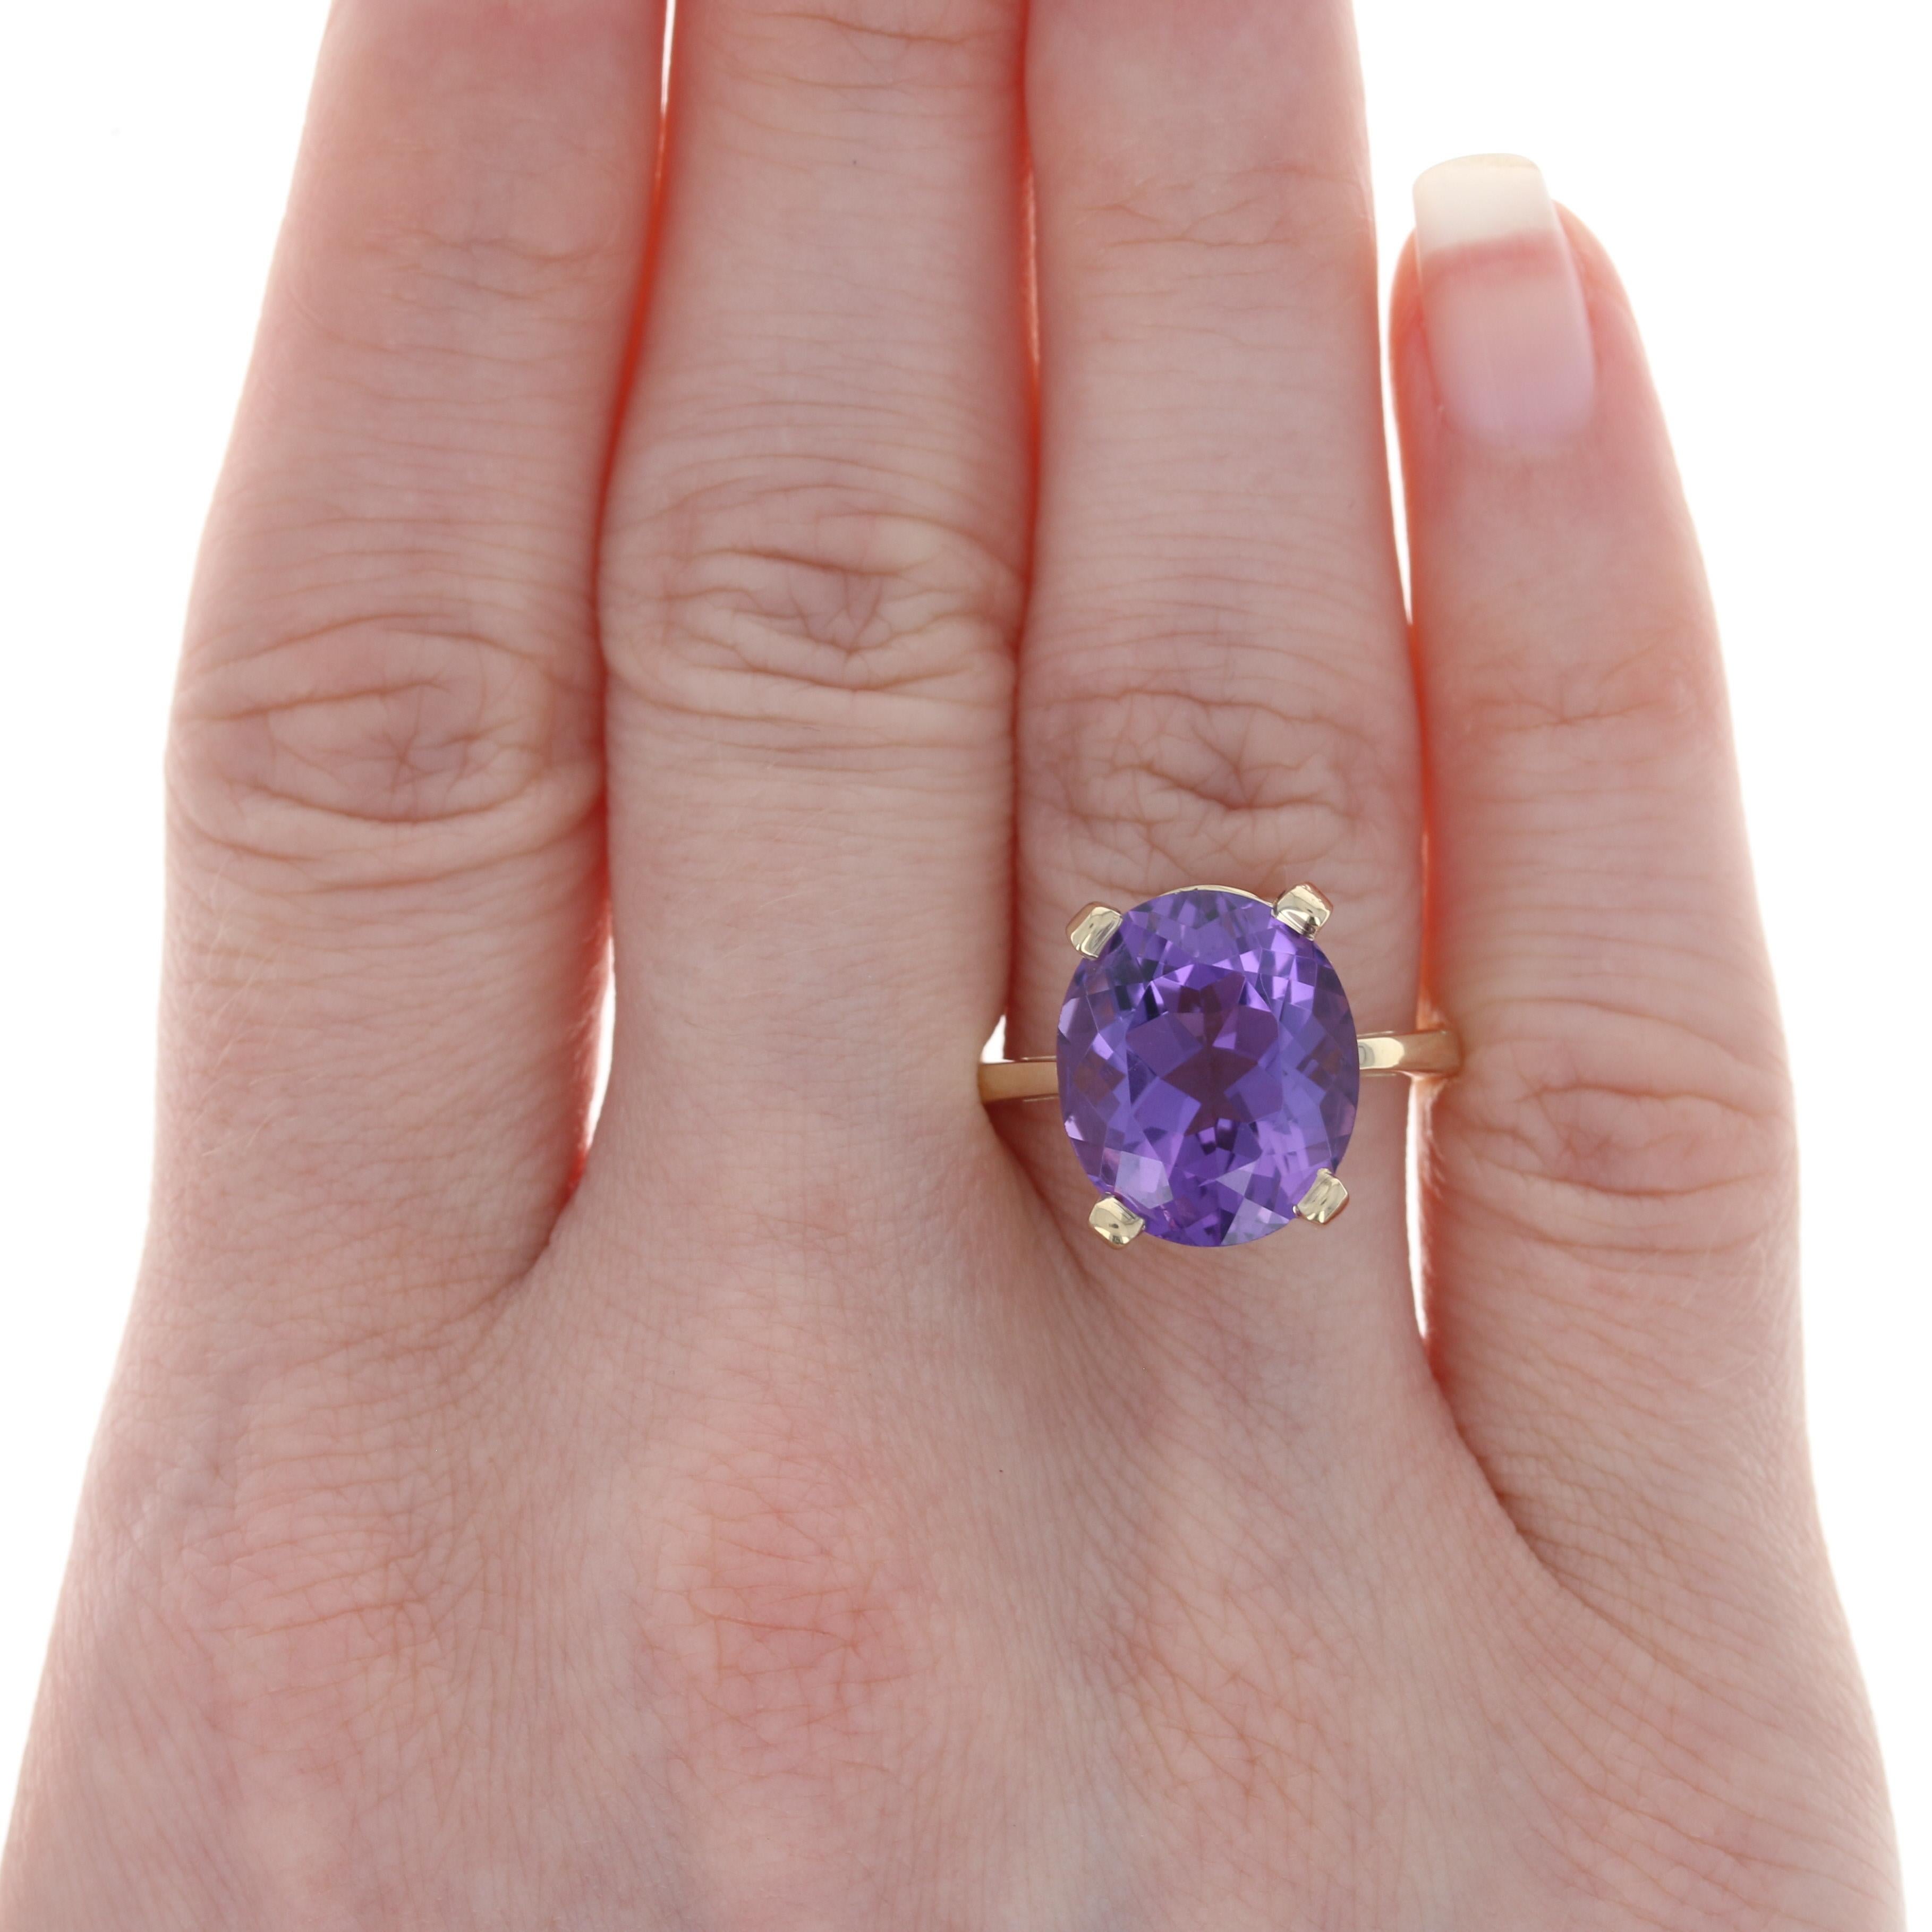 Size: 7 1/4
Sizing Fee: Down or up 2 sizes for a $25 fee

Metal Content: 14k Yellow Gold

Stone Information: 
Genuine Amethyst
Carat: 8.20ct
Cut: Oval
Color:  Purple
Size: 14.2mm x 12mm

Style: Cocktail Solitaire
Features: Cathedral Mount

Face